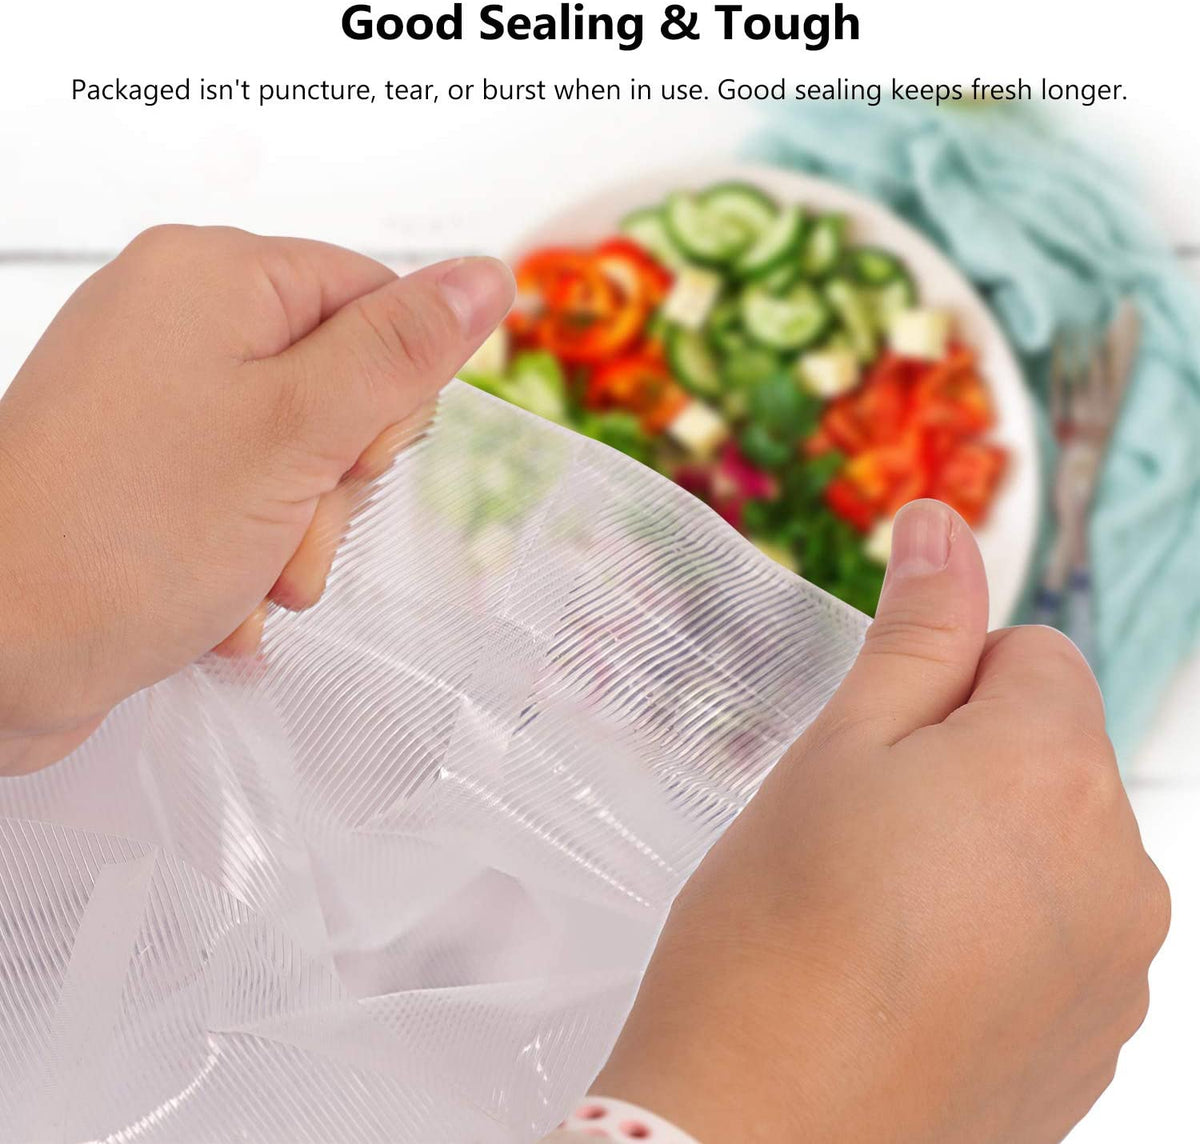 ABOX Home Appliance ABOX Vacuum Sealer bag with roll 11&quot; x 197&quot;